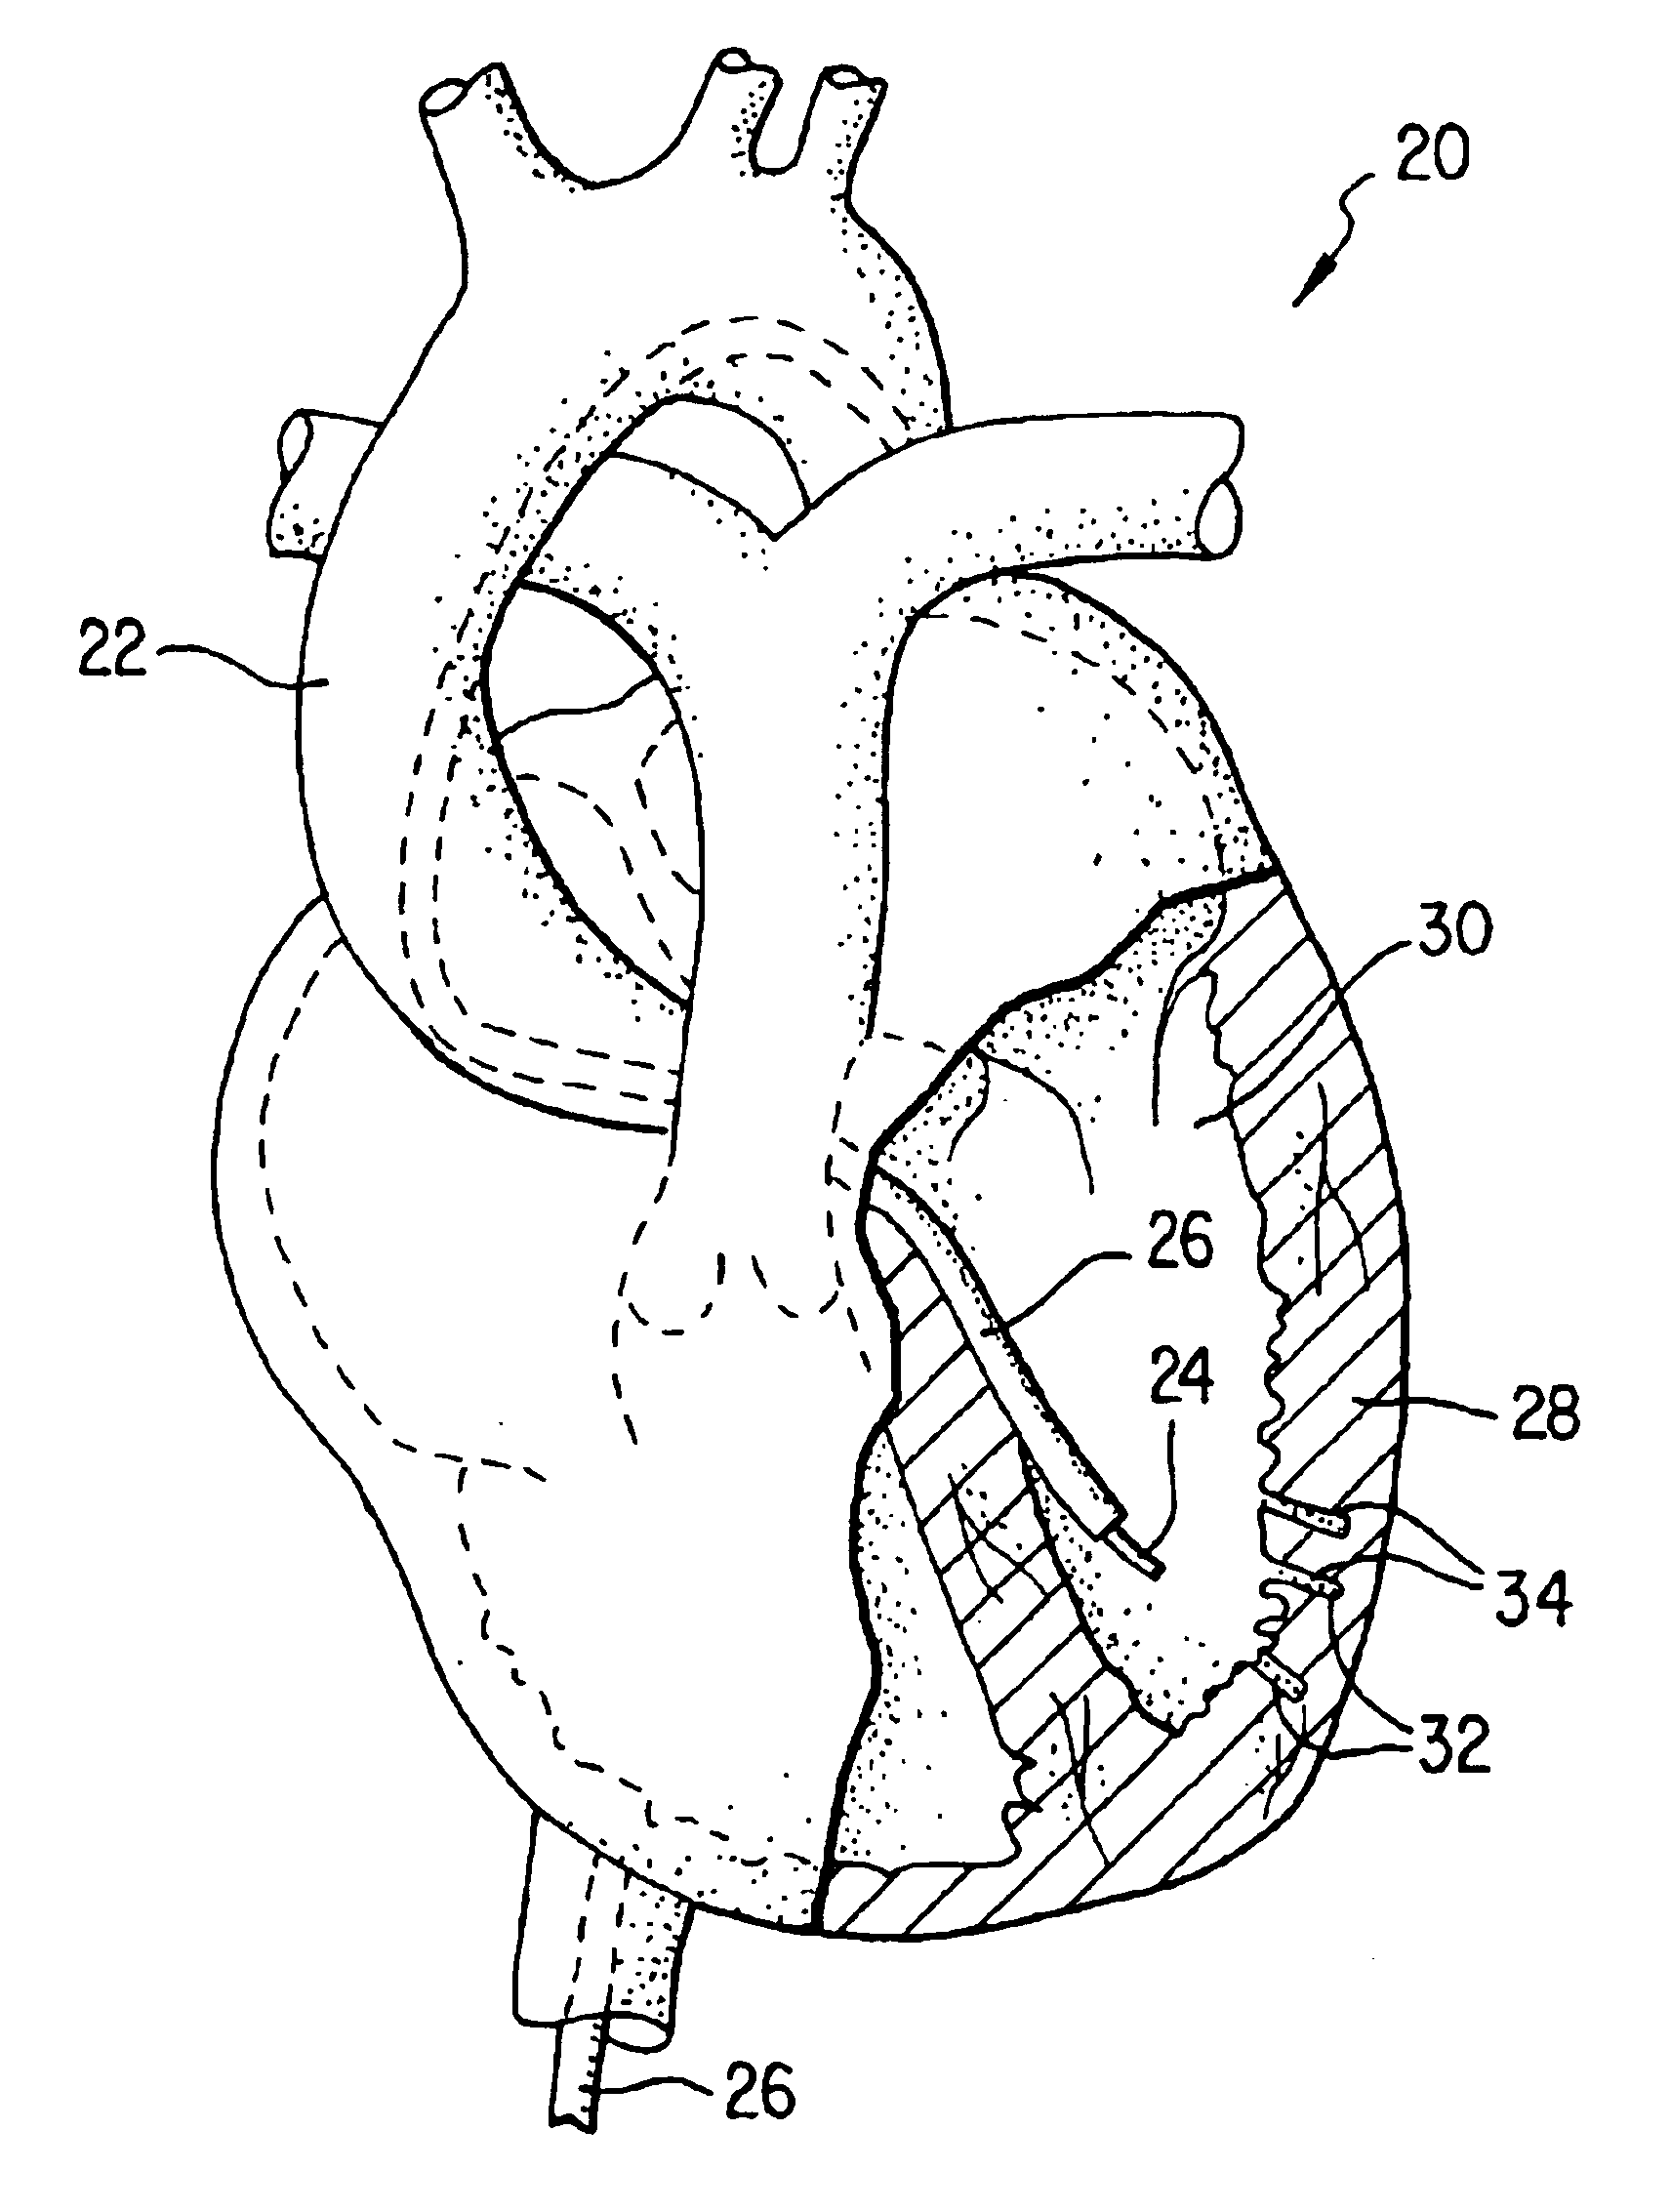 Methods for delivering a therapeutic implant to tissue